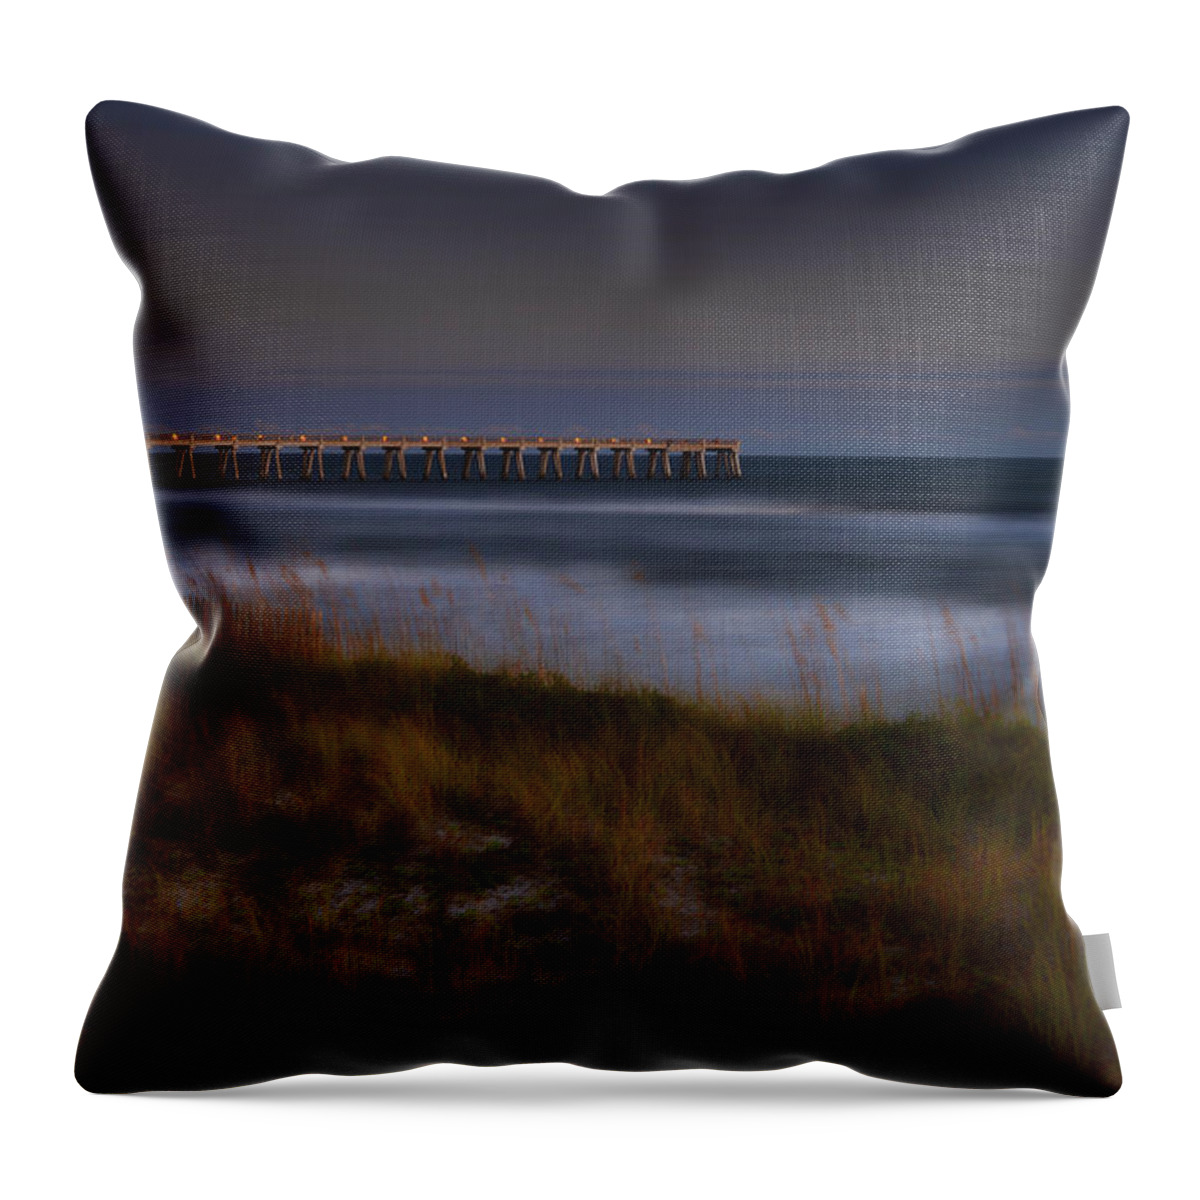 Pier Throw Pillow featuring the photograph Nightlife by the Sea by Renee Hardison